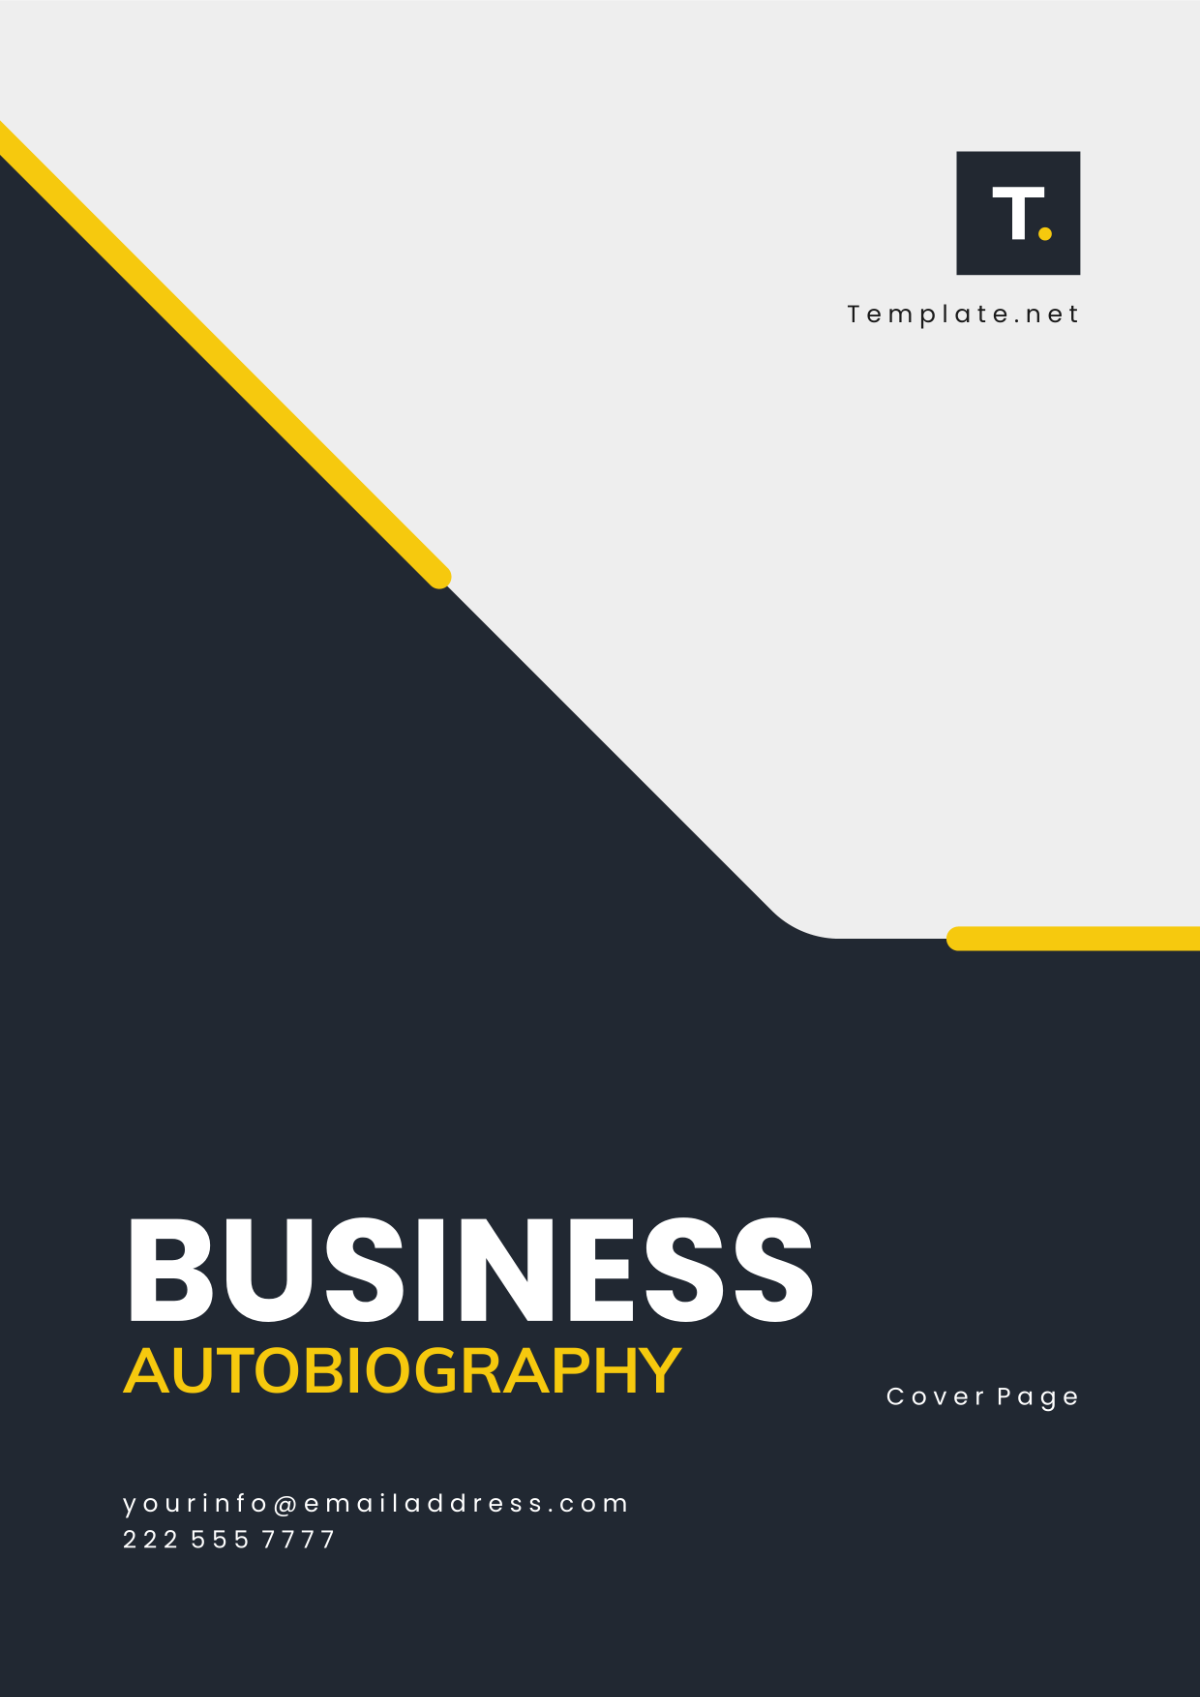 Business Autobiography Cover Page Template